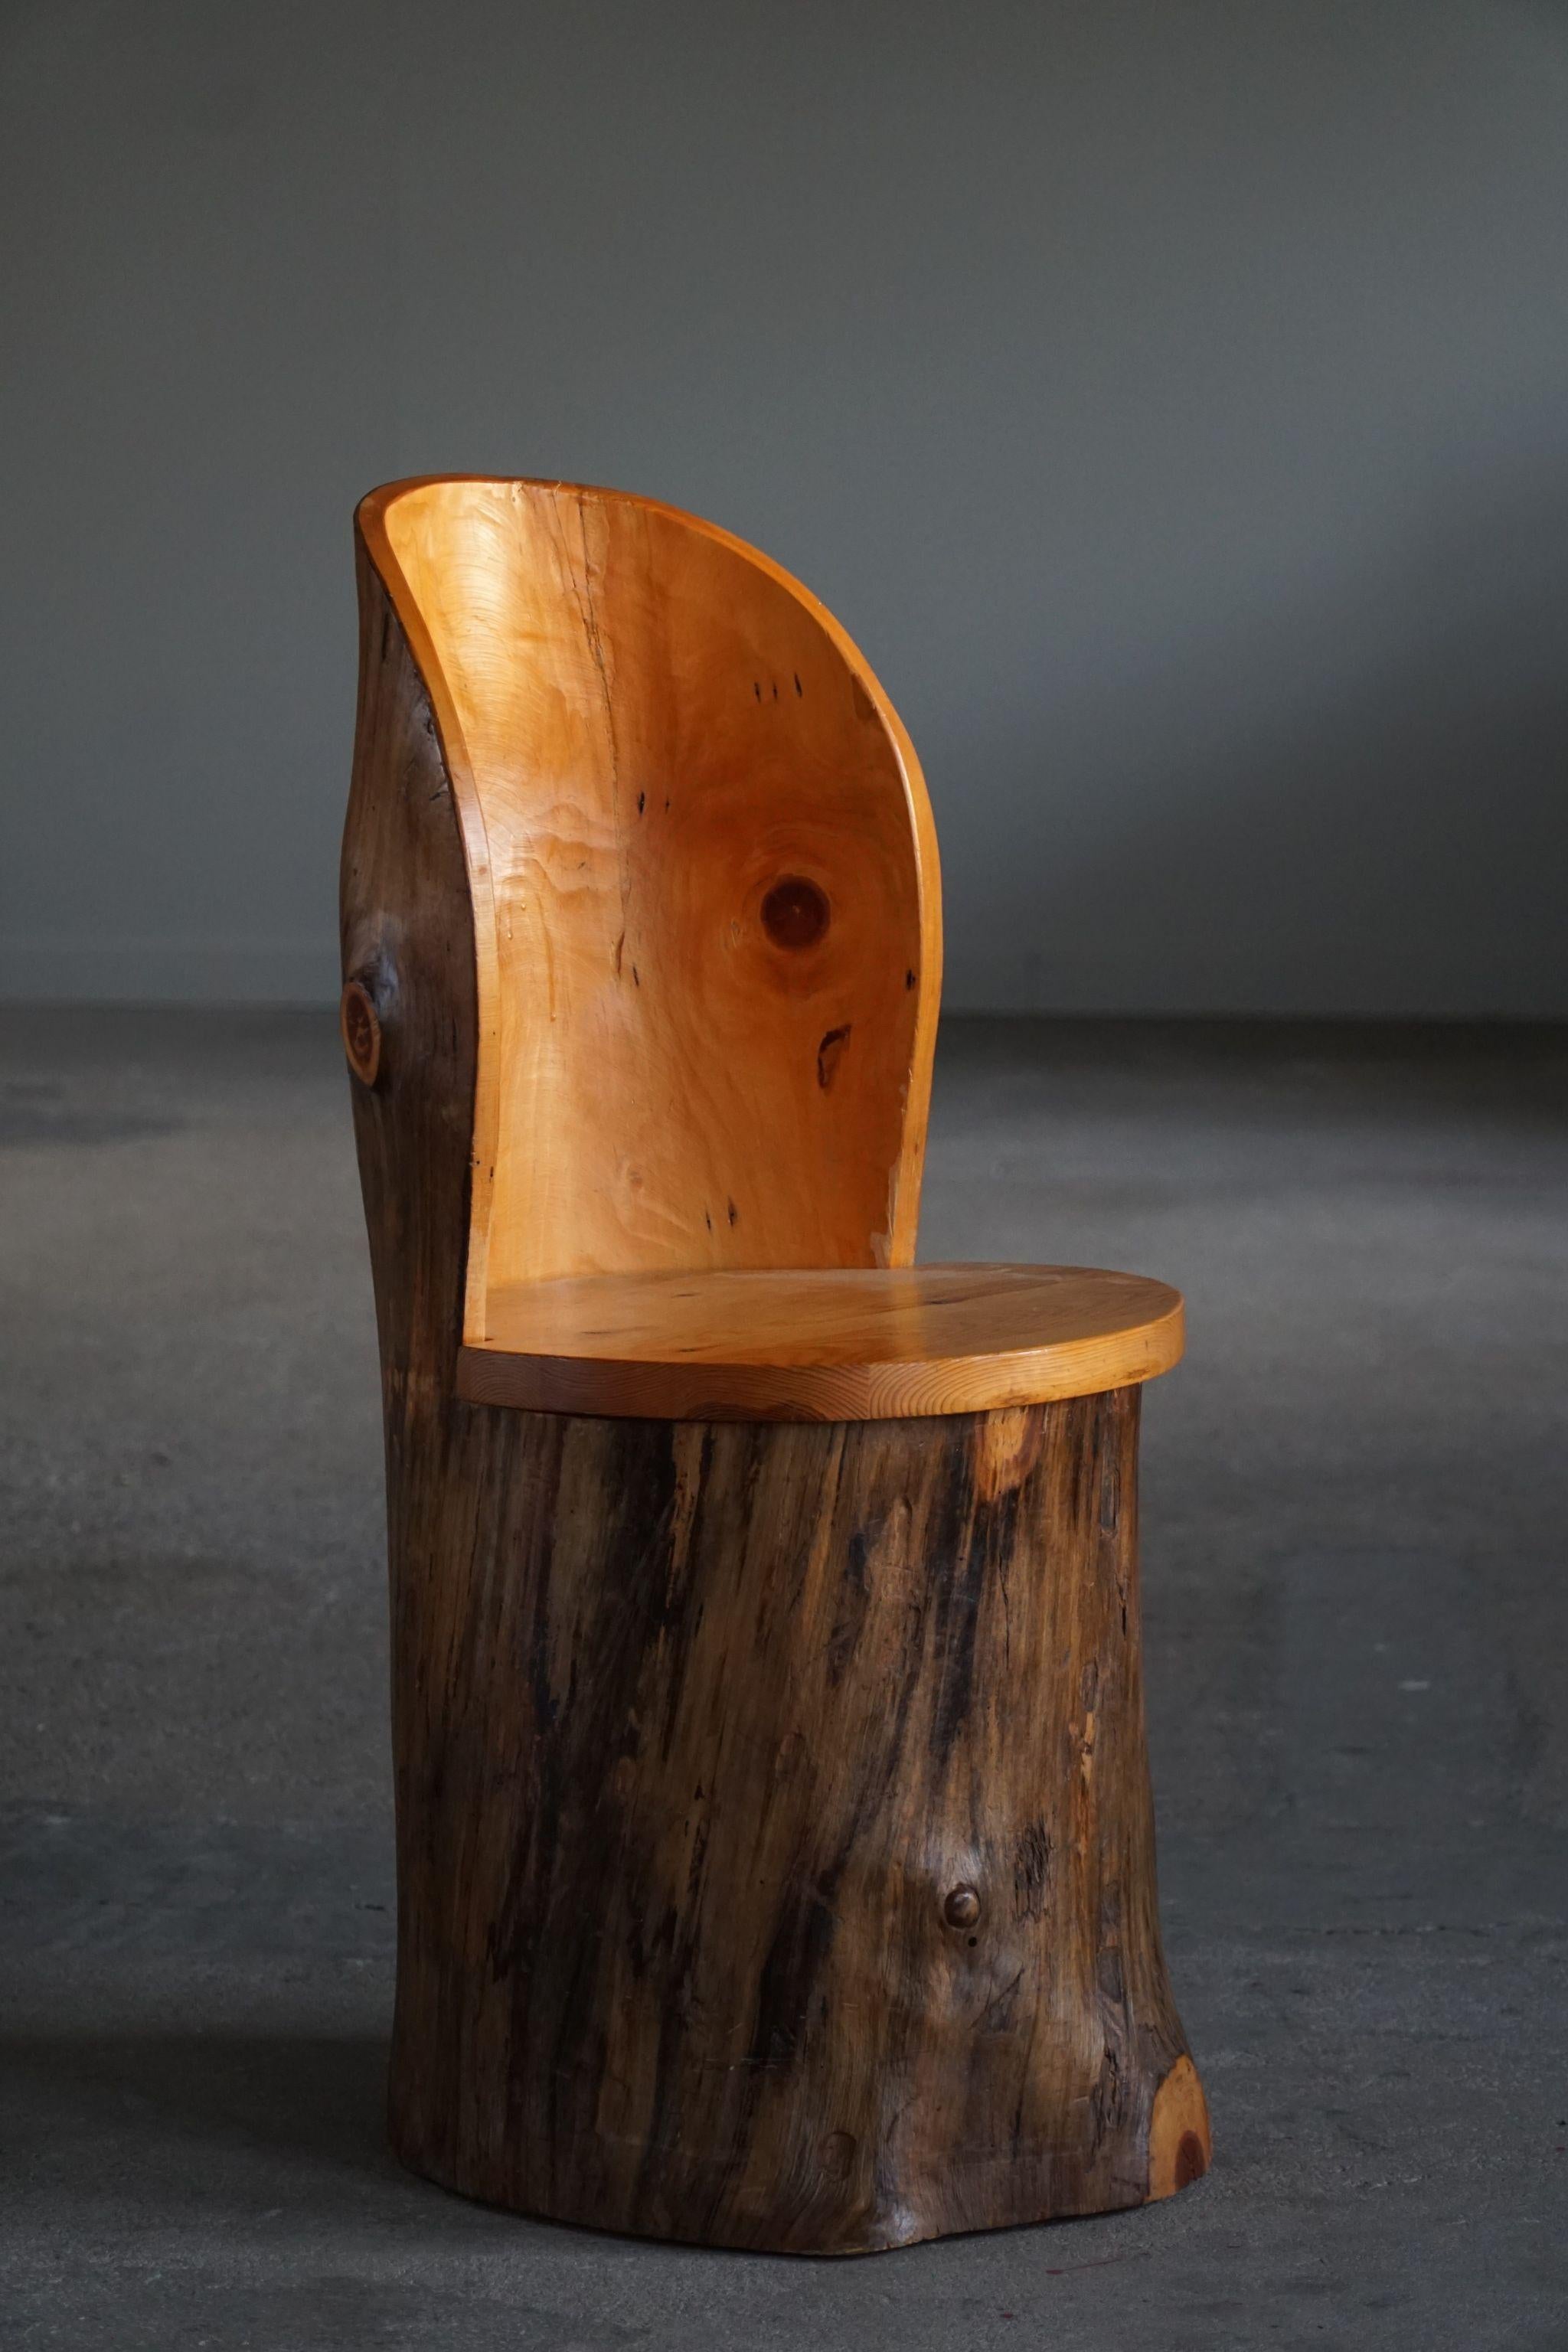 Hand Carved Primitive Swedish Modern Stump Chair in Pine, Wabi Sabi, 1960s In Good Condition For Sale In Odense, DK